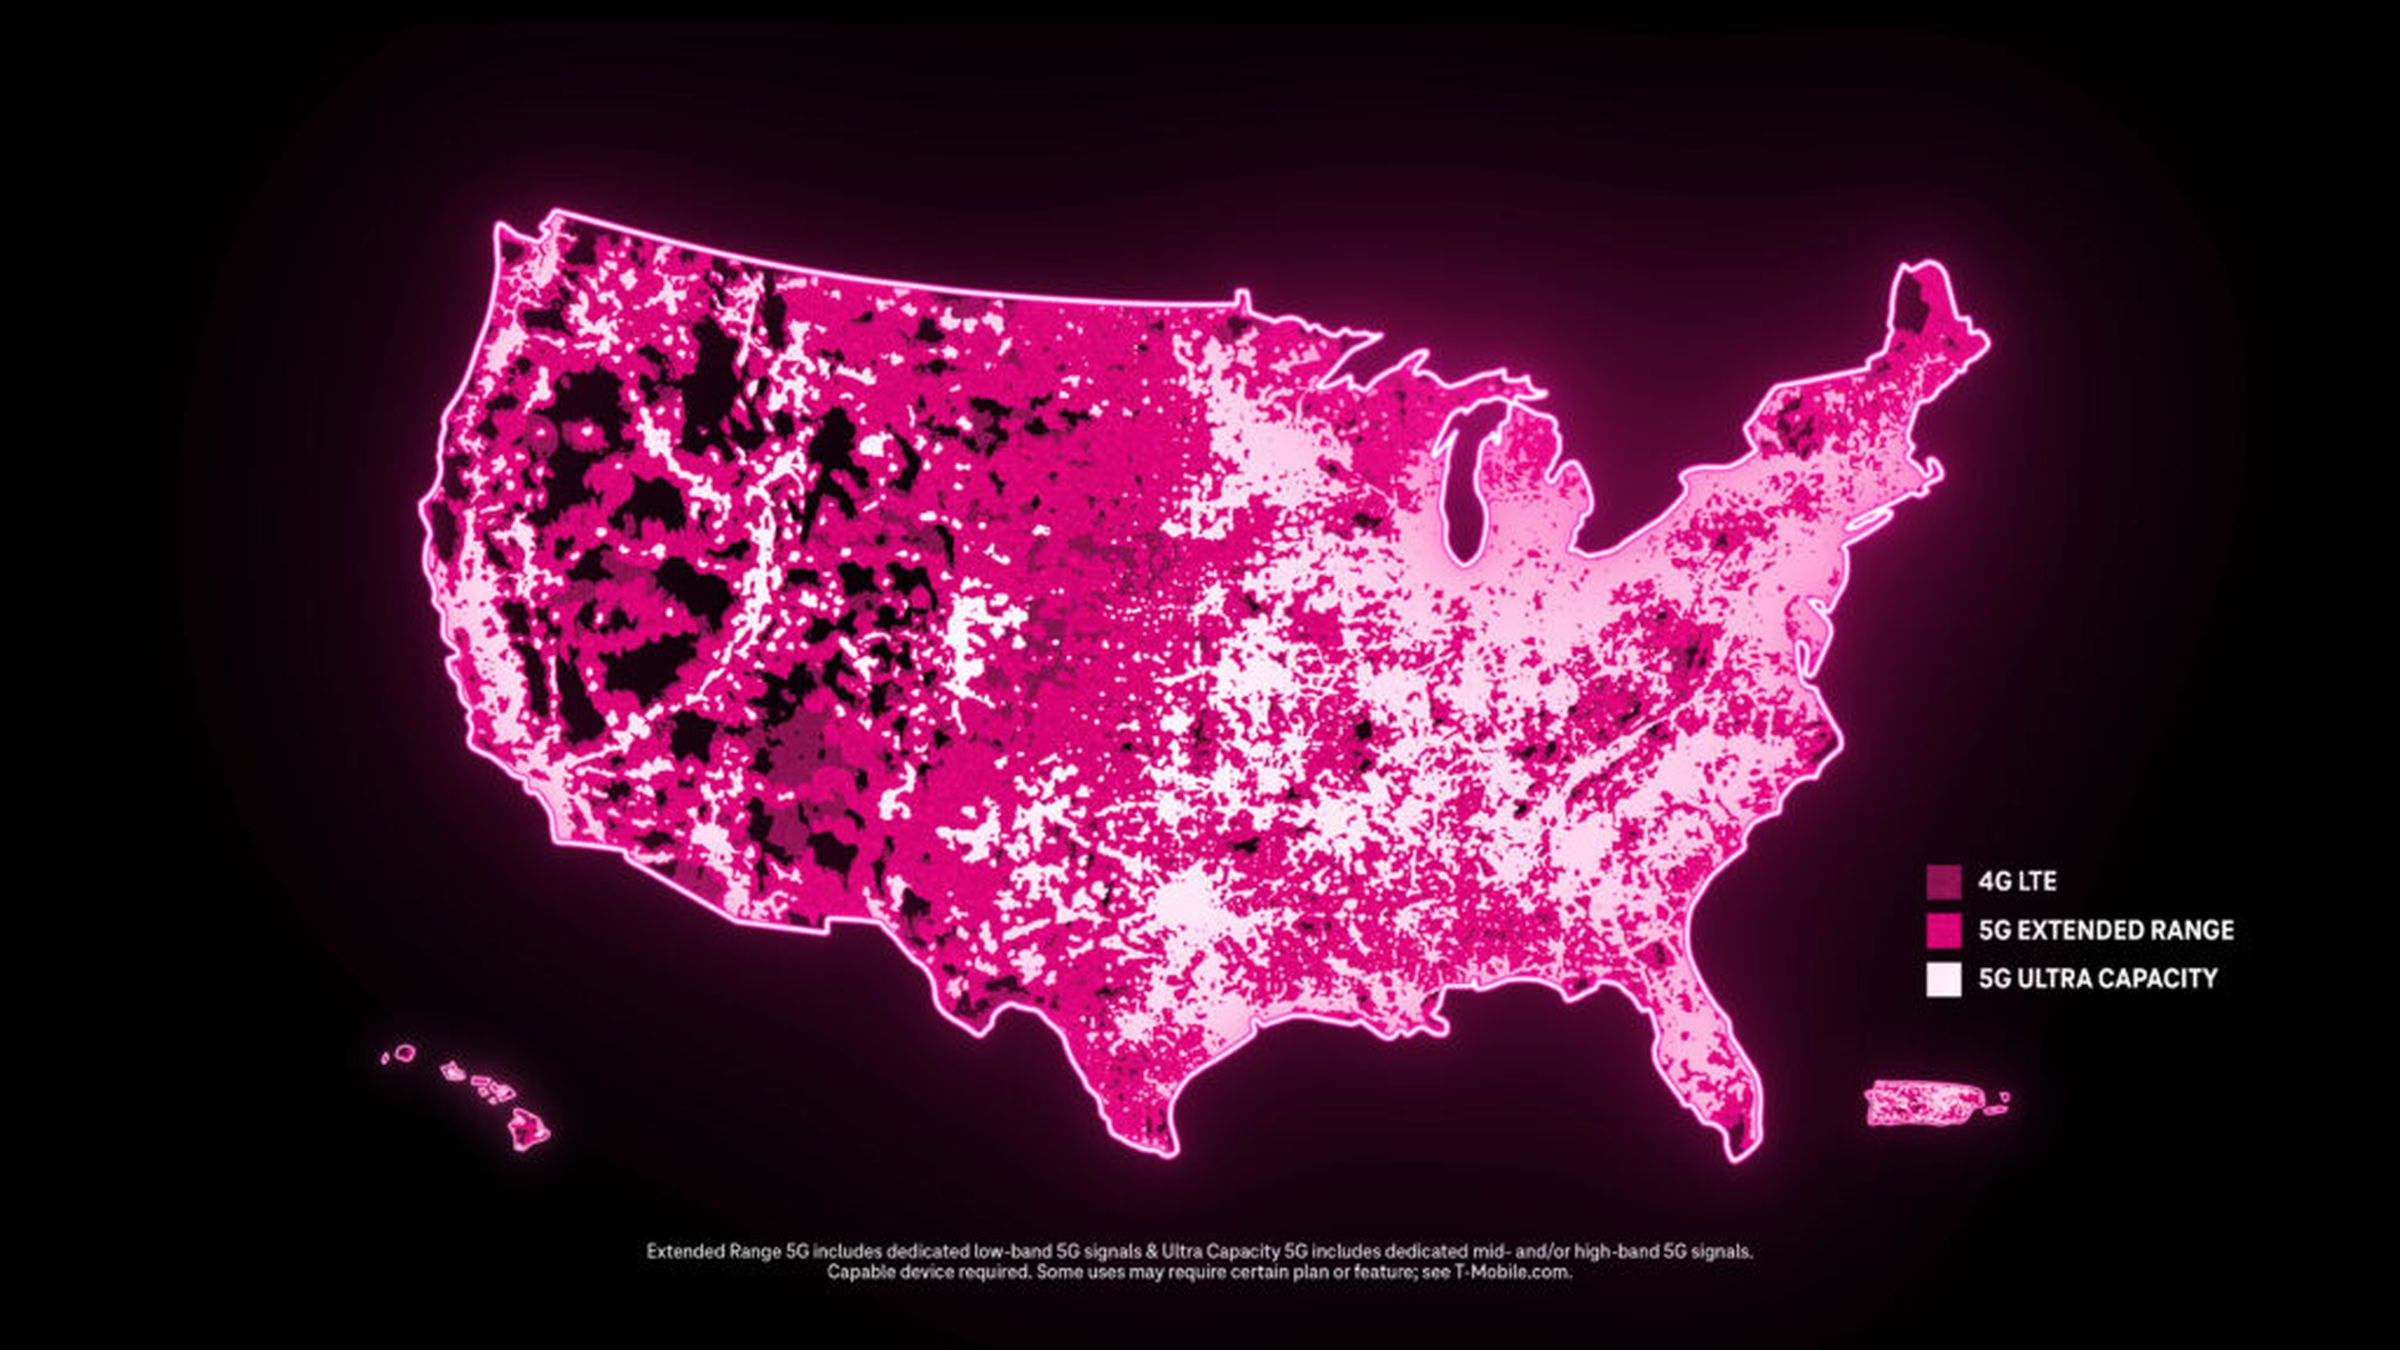 An image showing T-Mobile’s coverage in the US